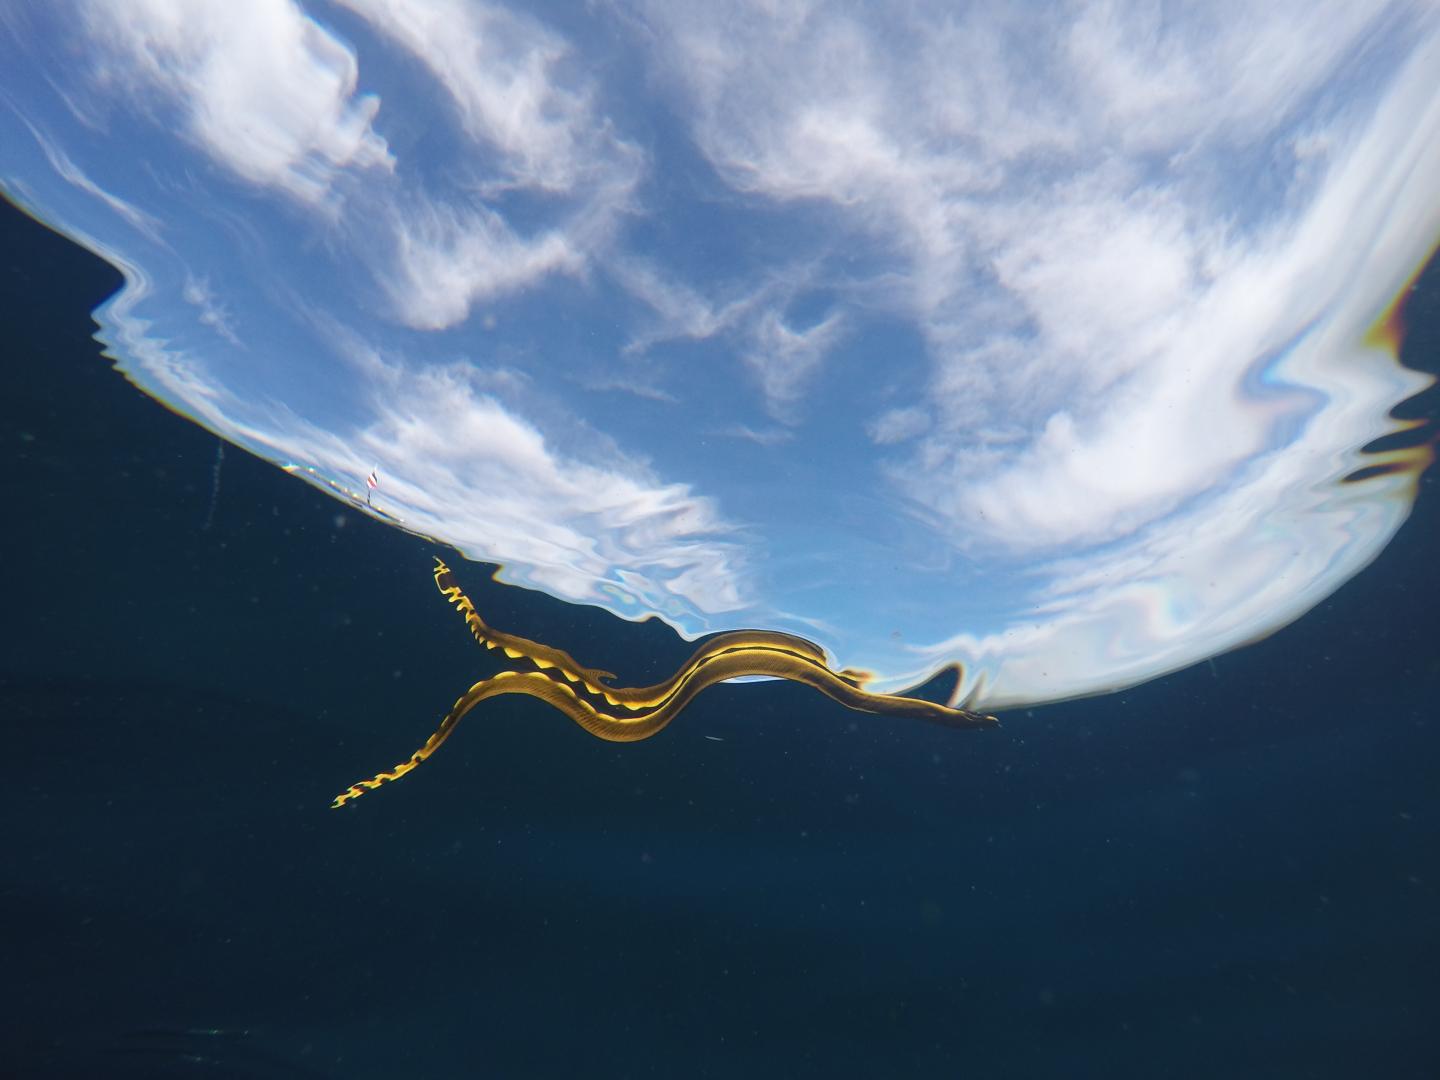 A Yellow-Bellied Sea Snake